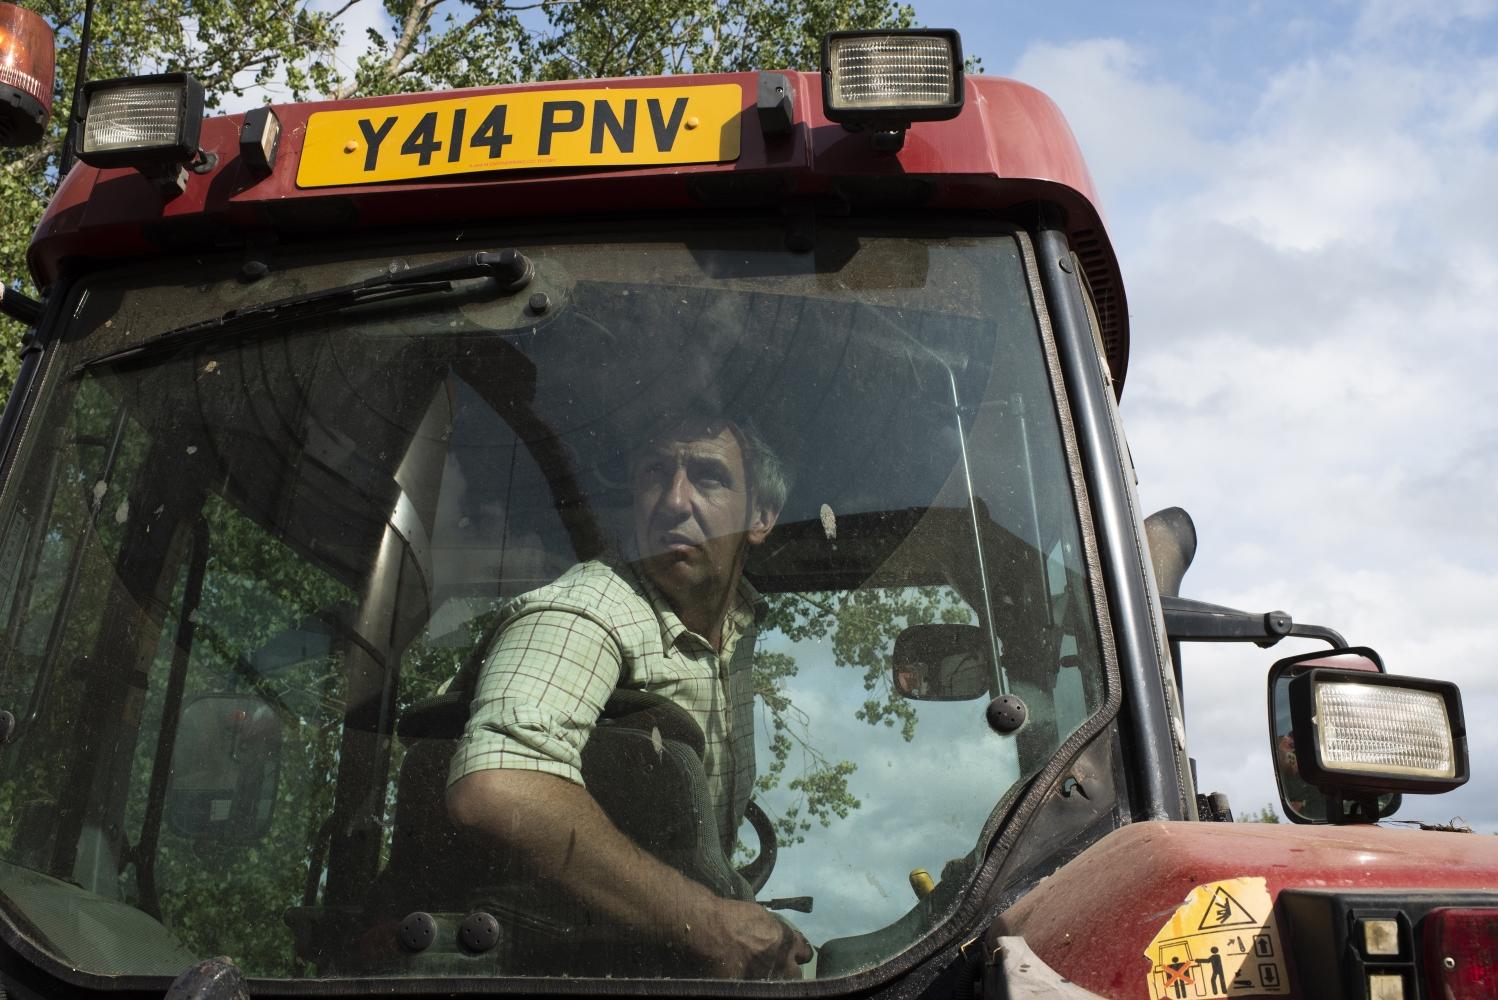 A man in a tractor cab